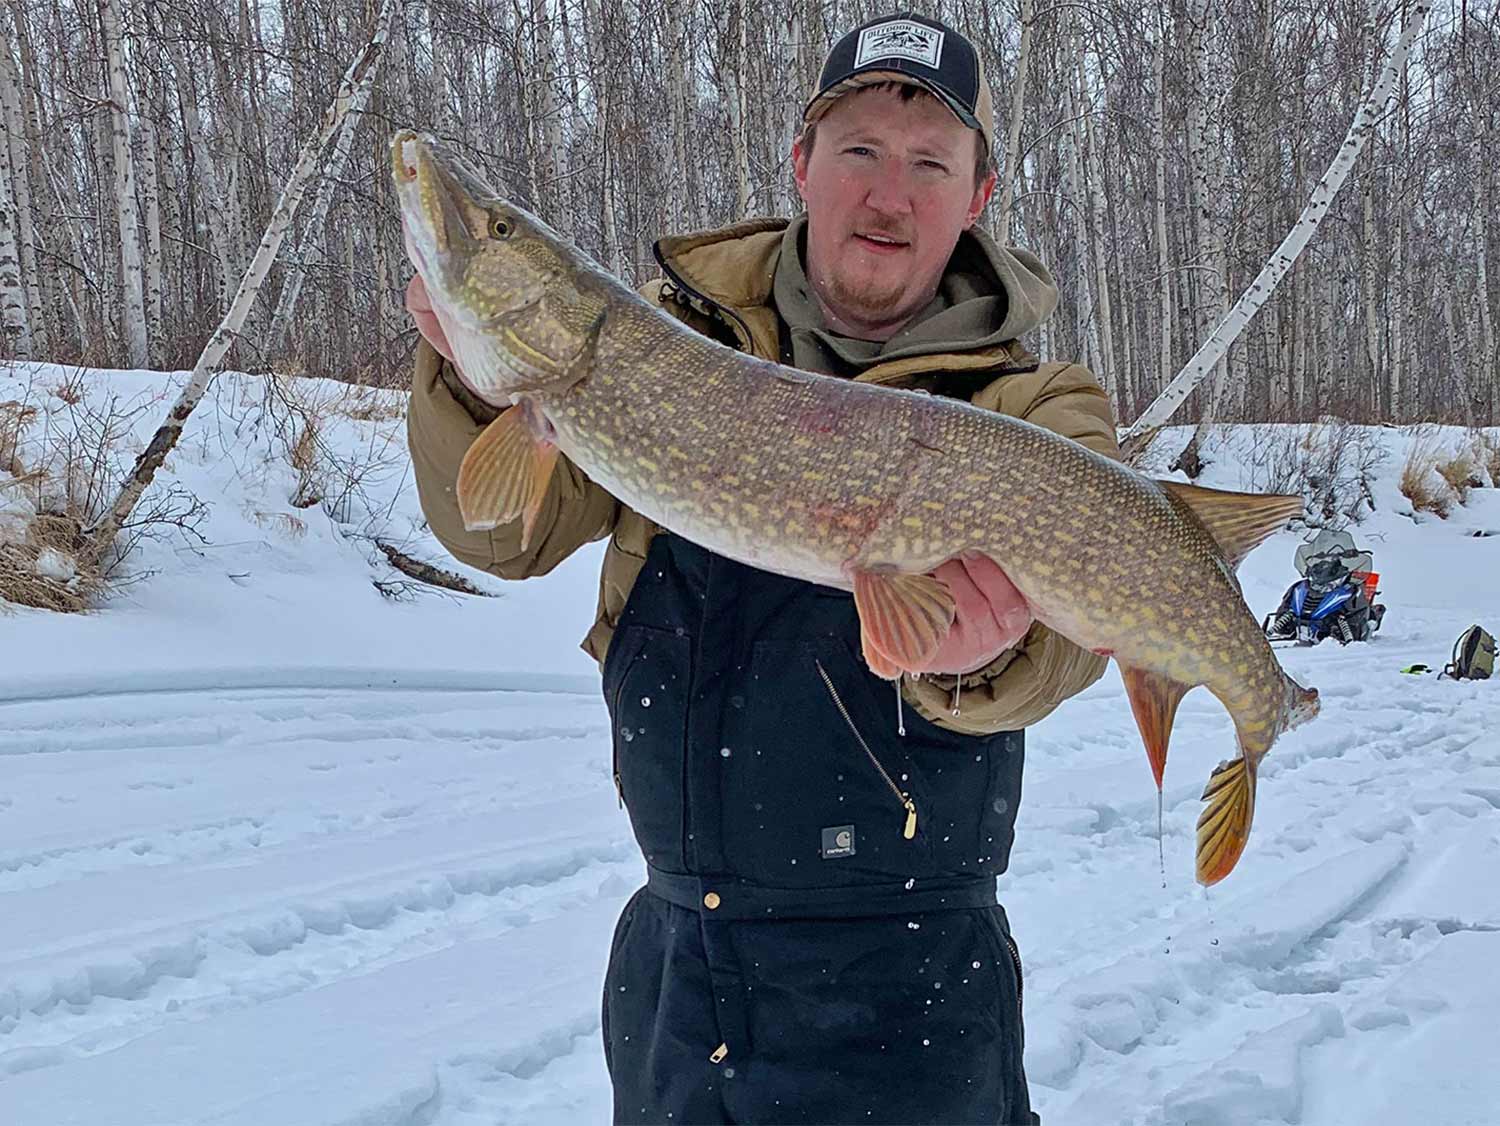 An angler holding up a large pike after ice fishing.